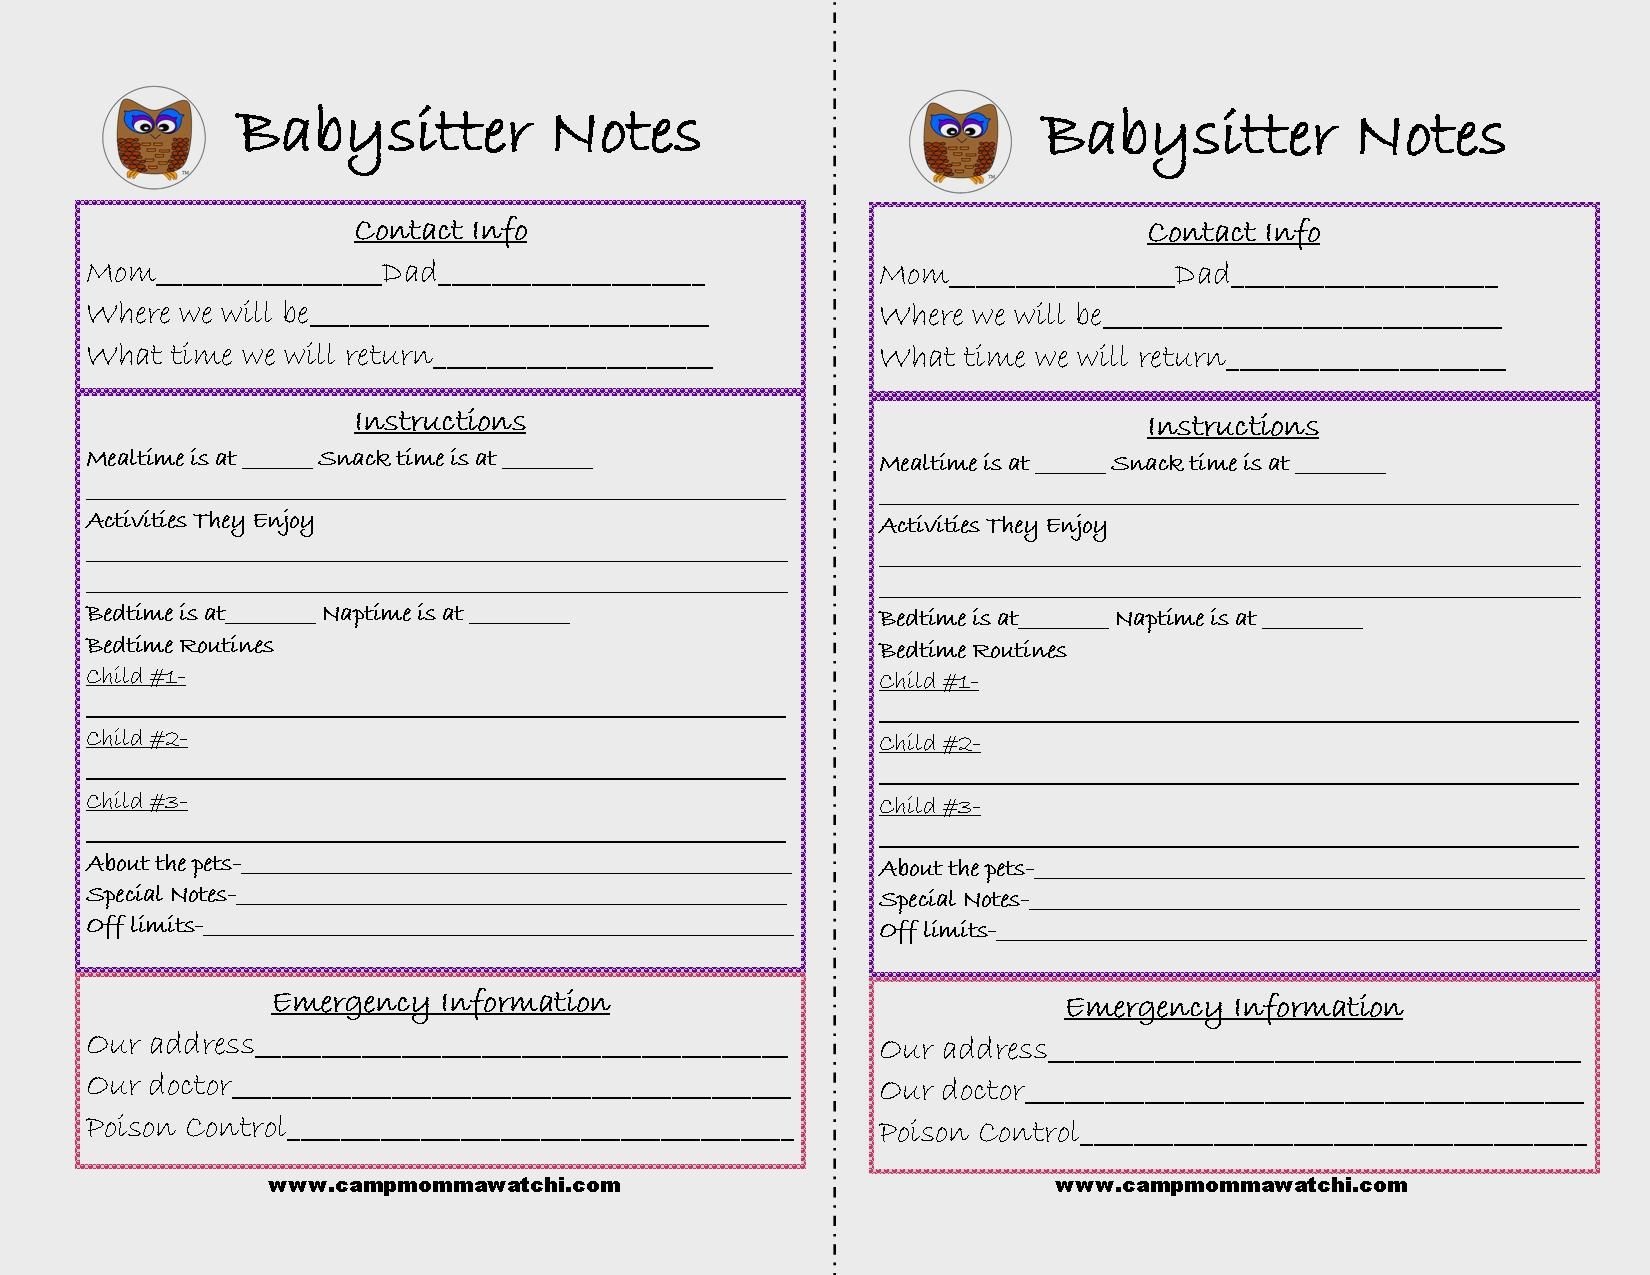 Free Printable Babysitter Notes | Camp Mommawatchi | Crafts And - Babysitter Notes Free Printable